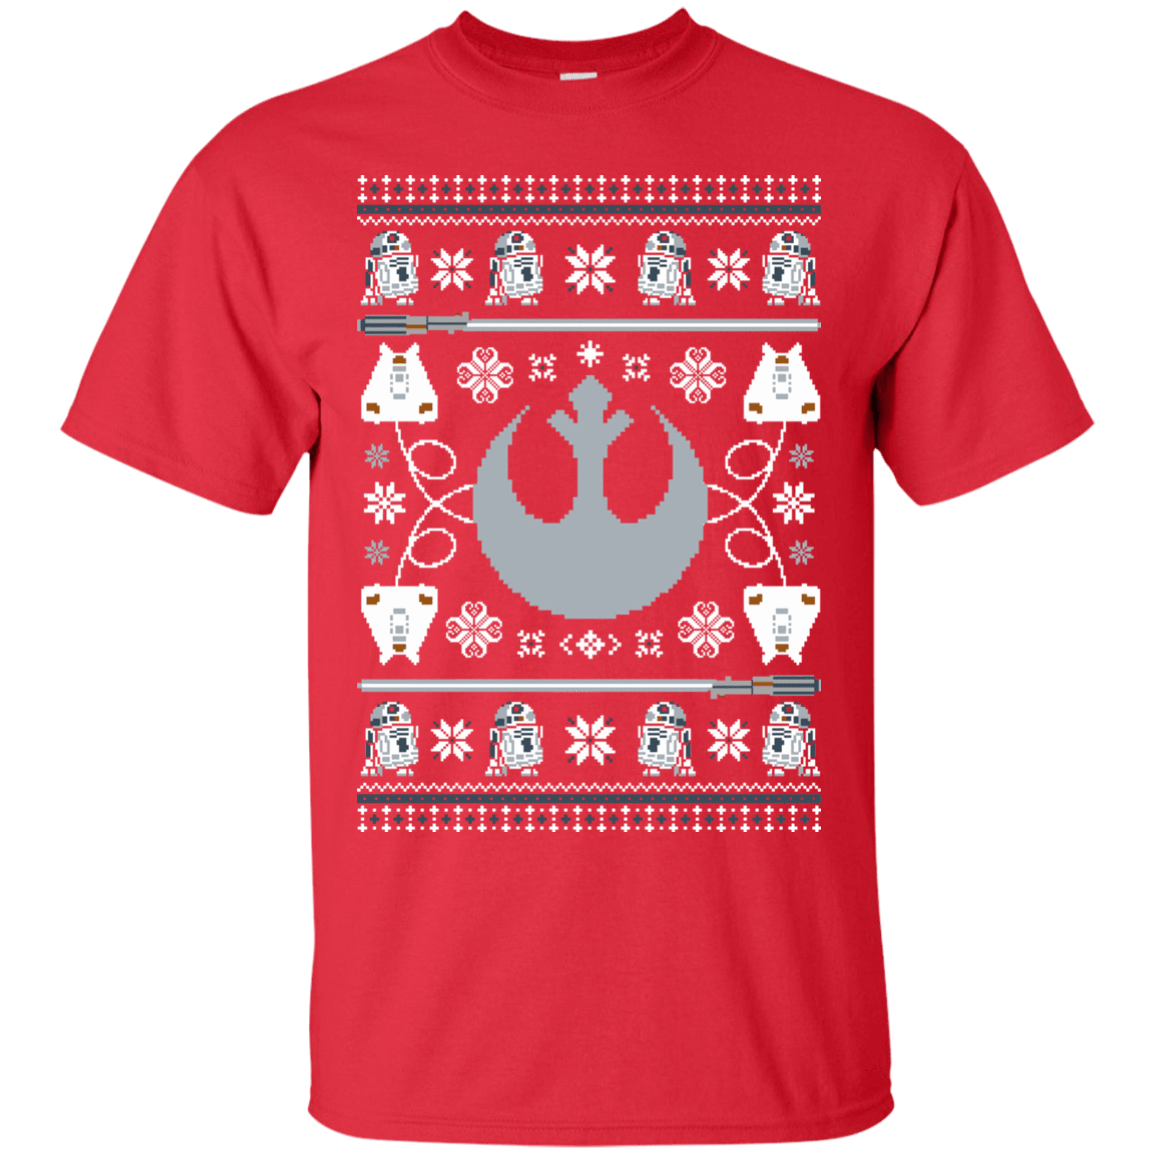 T-Shirts Red / Small UGLY STAR WARS ALLIANCE T-Shirt